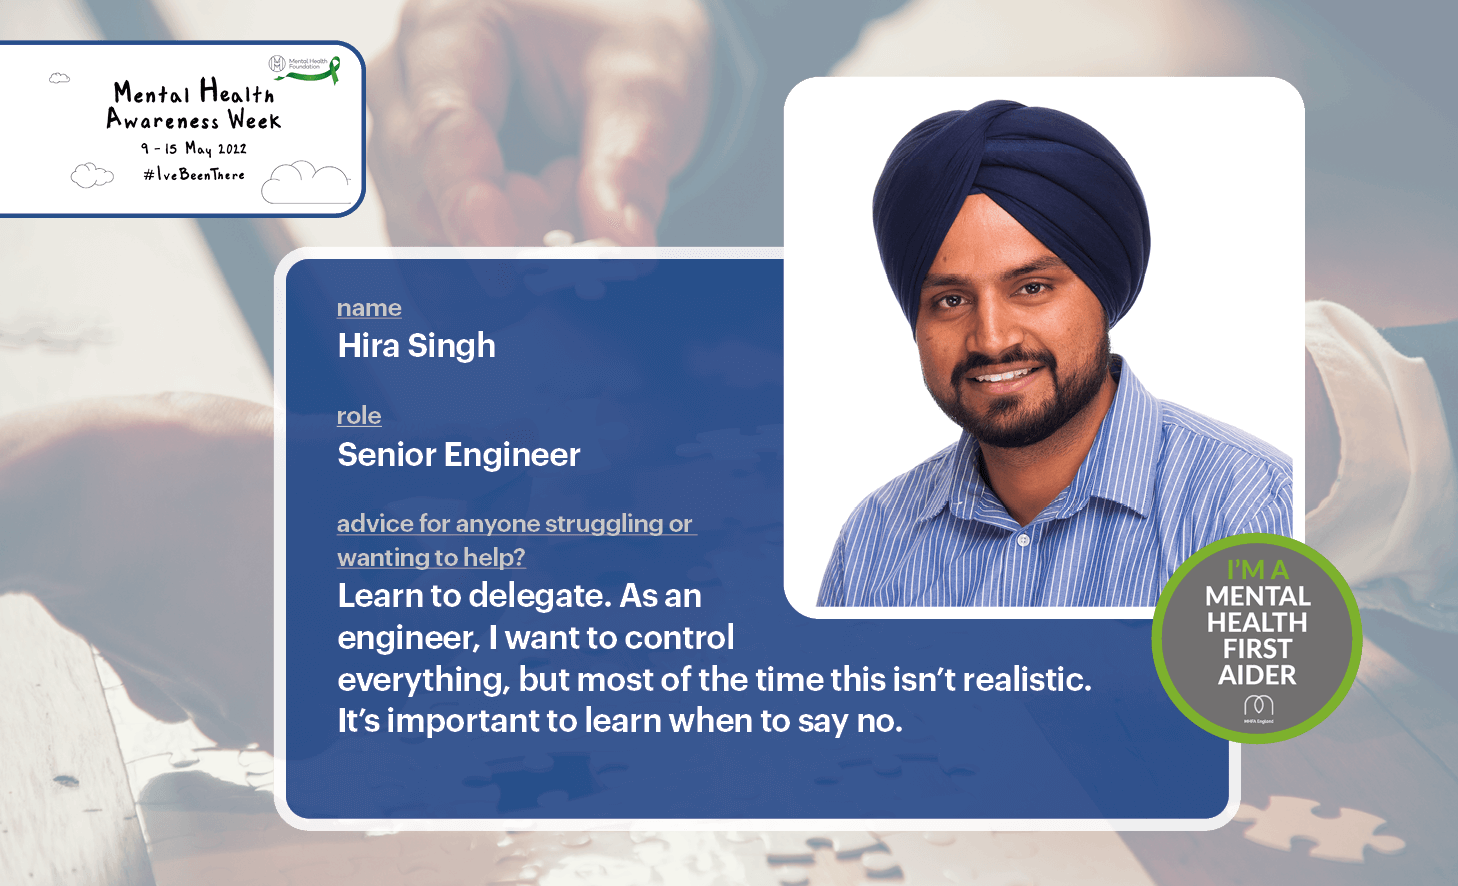 Advice from our Mental Health First Aiders - Hira Singh, Senior Engineer